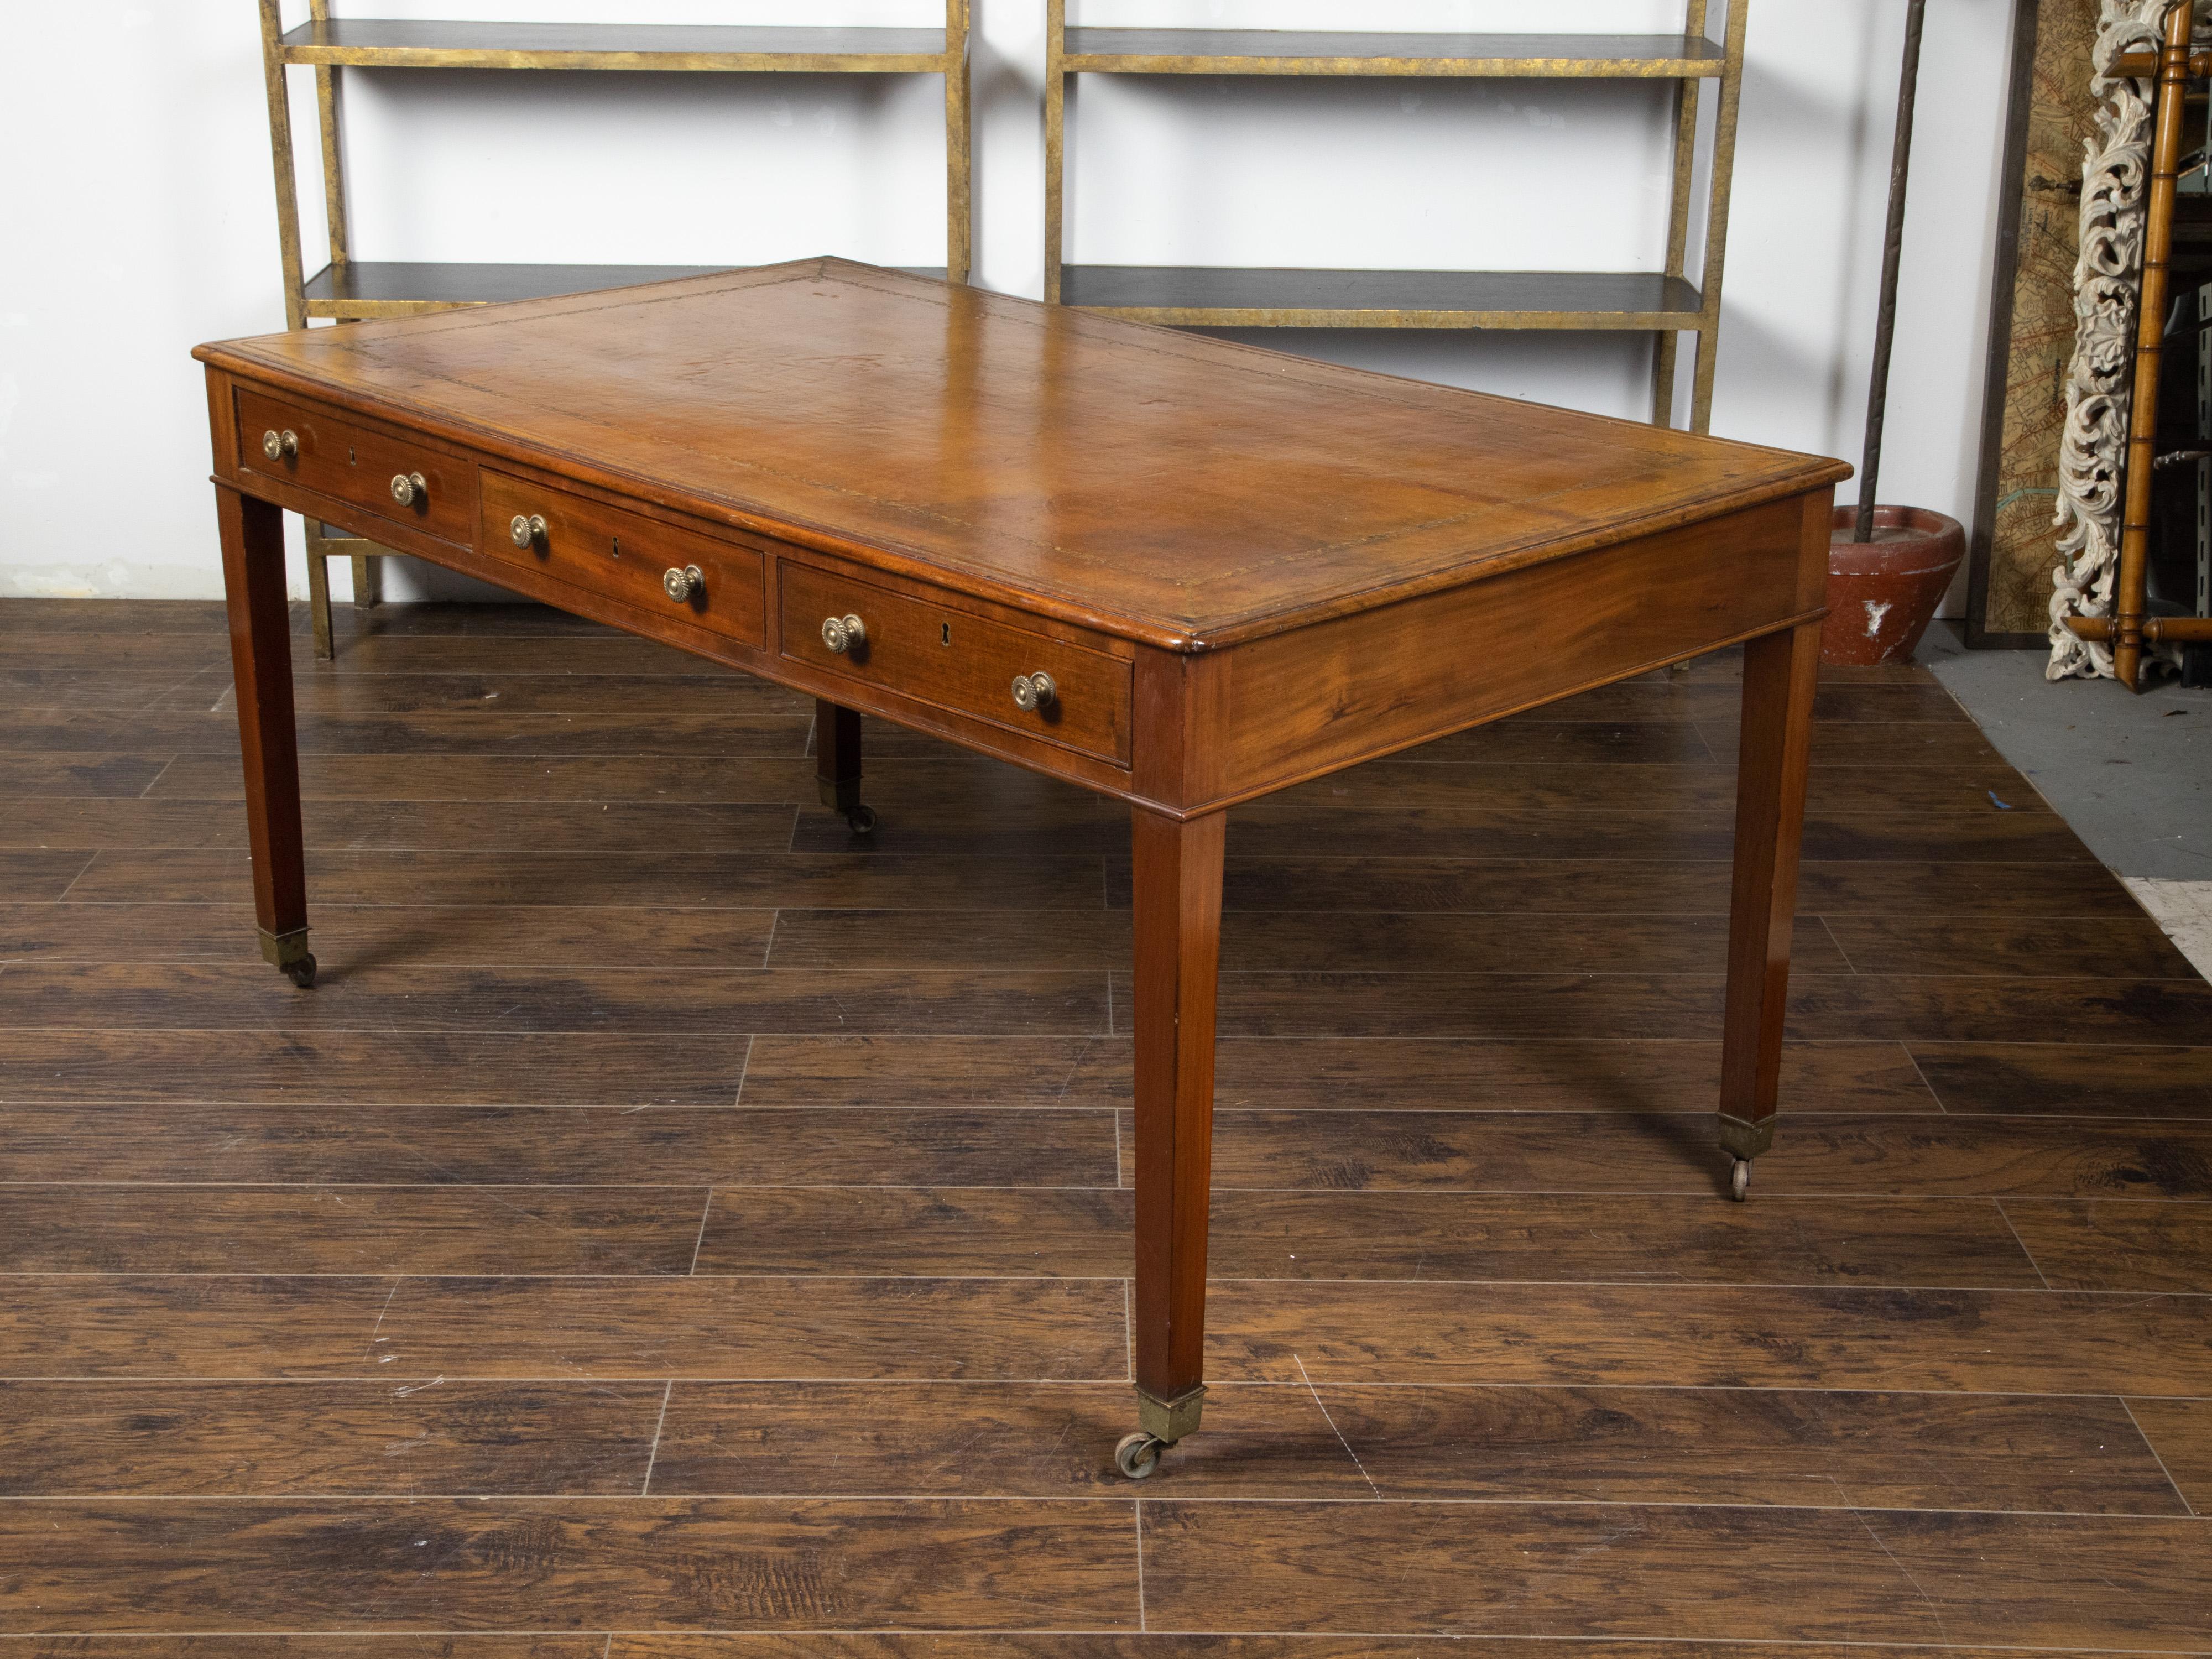 English 19th Century Mahogany Desk with Three Drawers, Mounted on Brass Casters 1